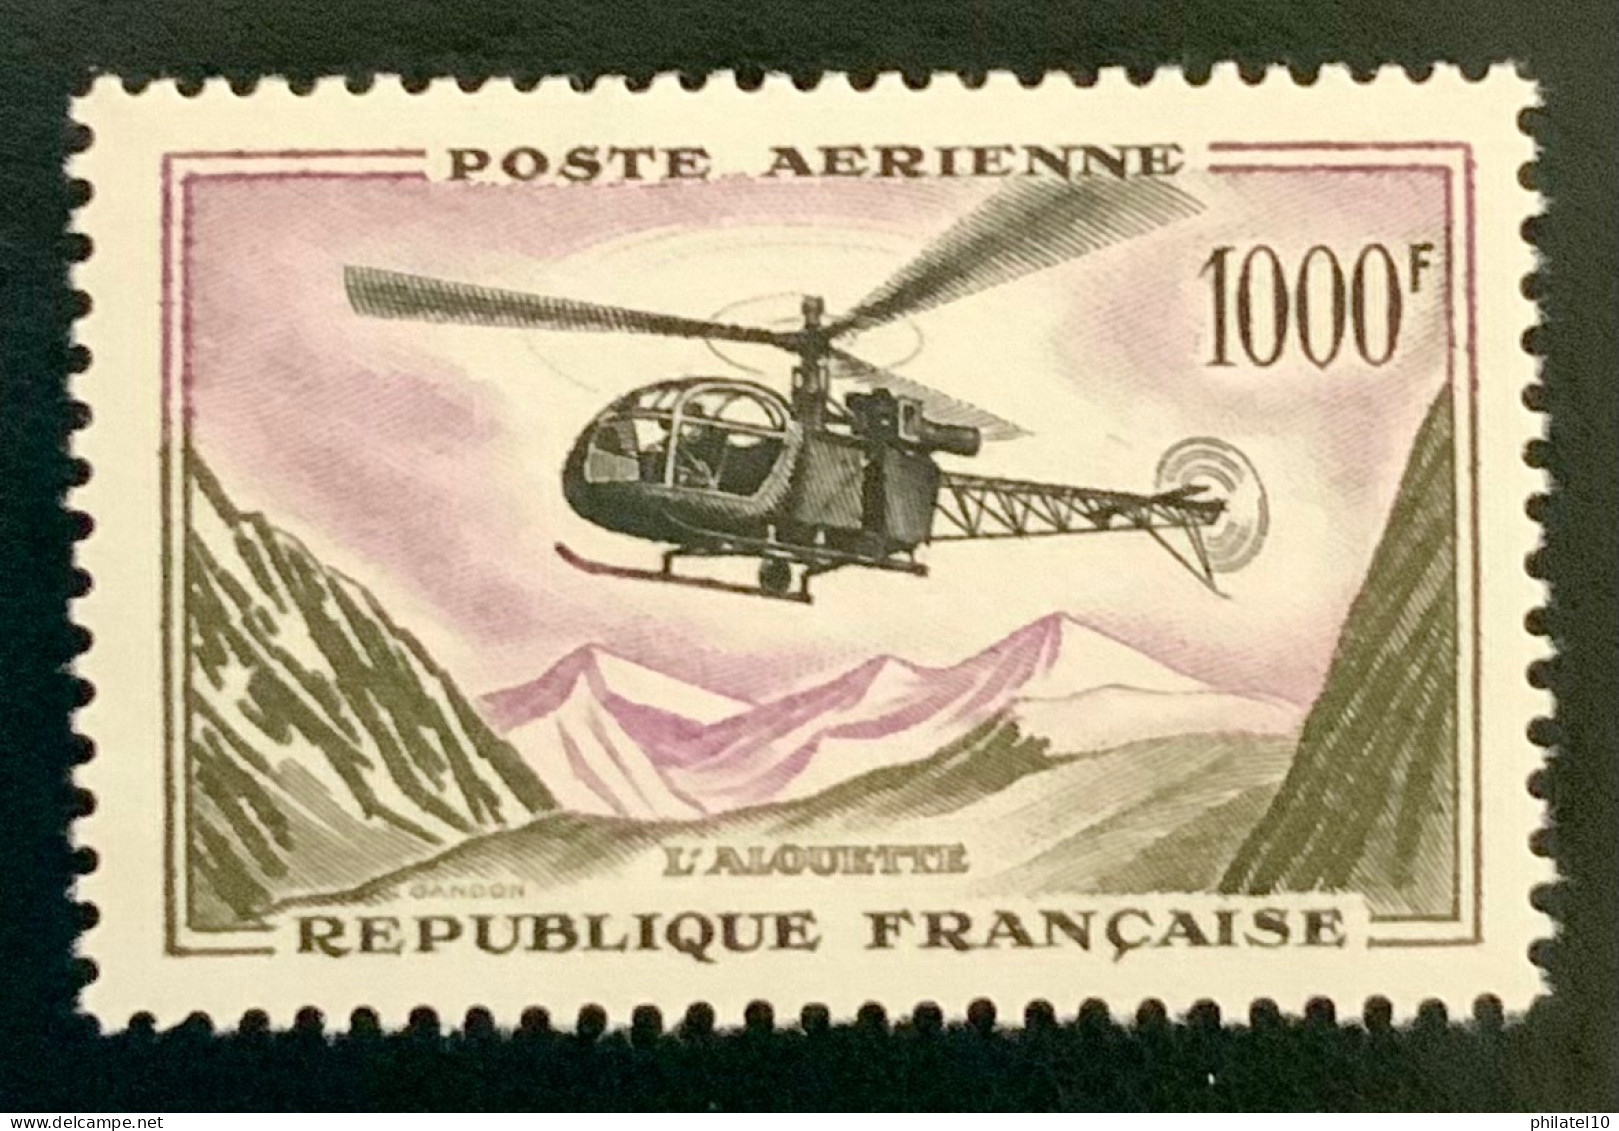 1959 FRANCE N 37 - POSTE AERIENNE L’ALOUETTE 1000F - NEUF** - 1927-1959 Mint/hinged